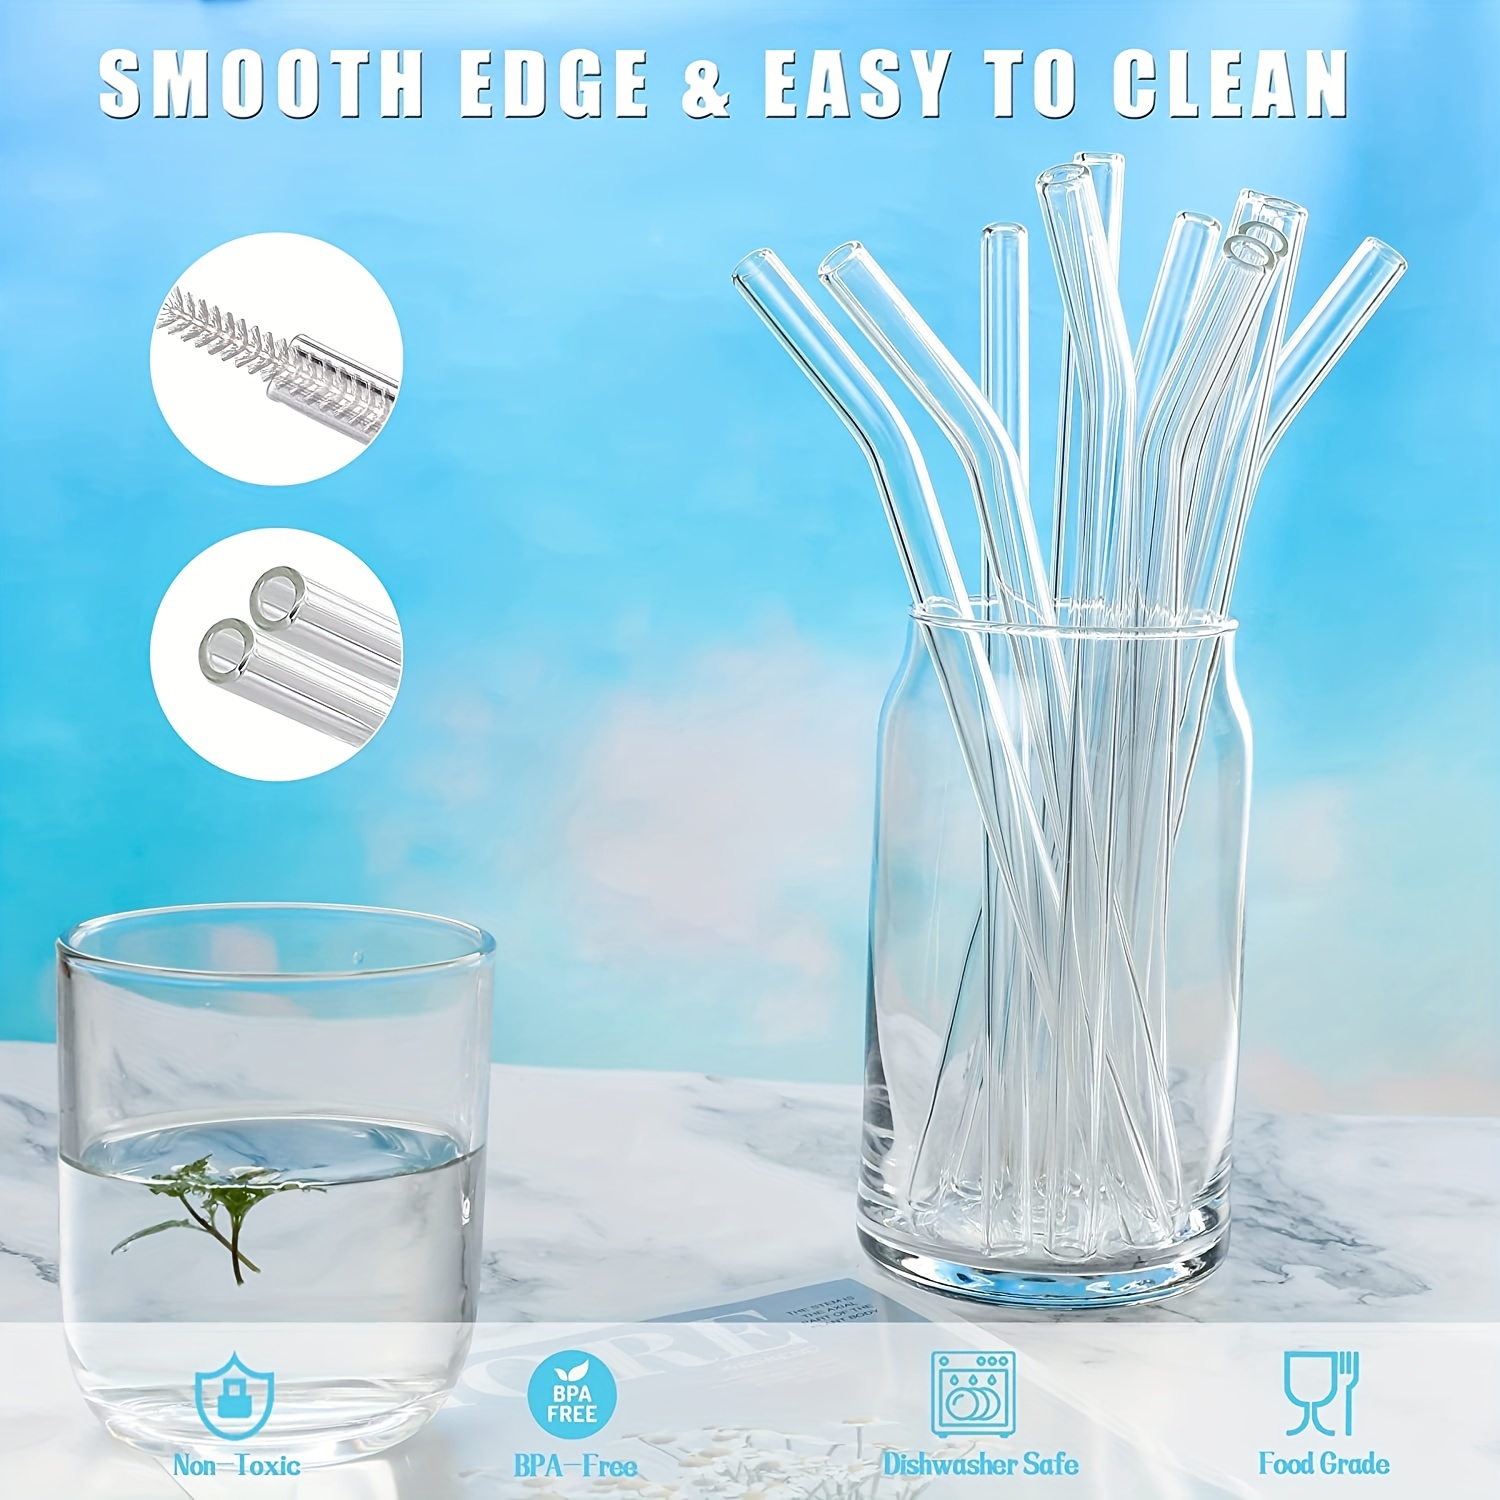 Clear Reusable Glass Straws